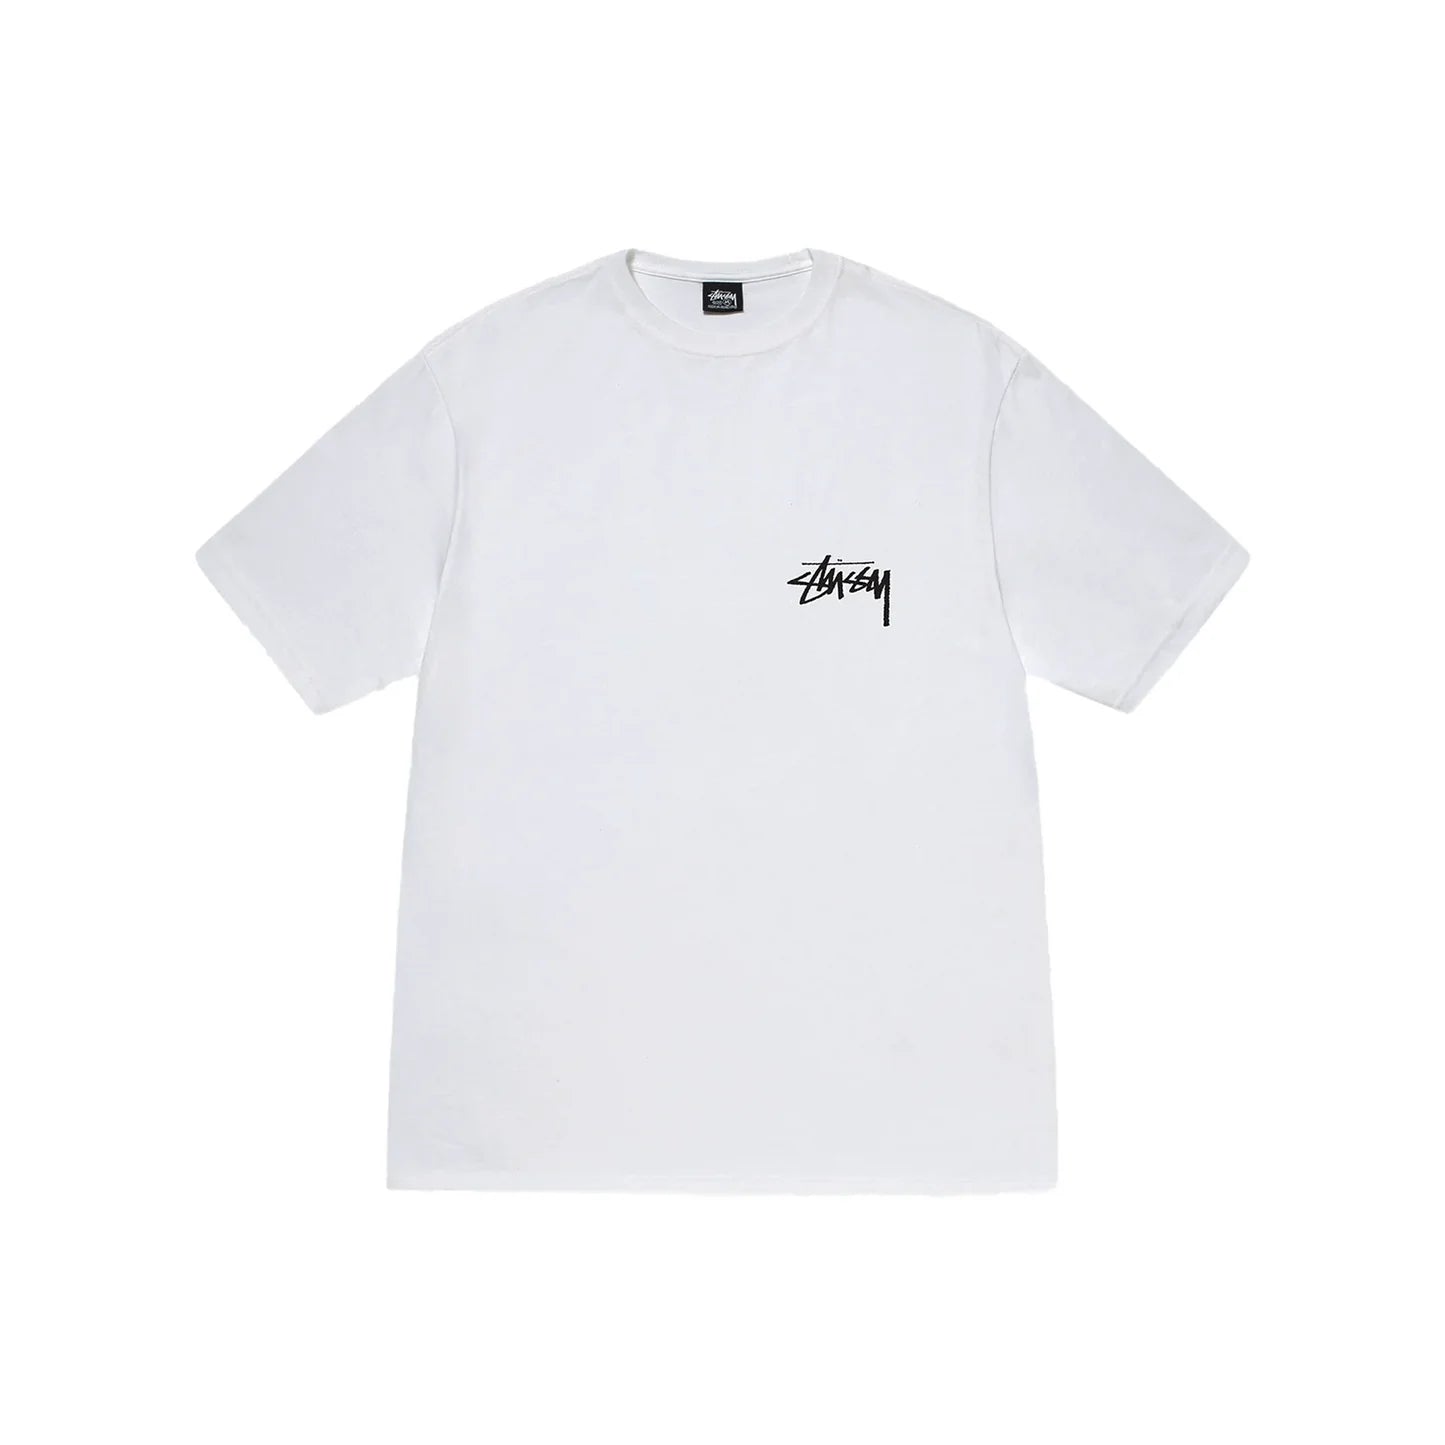 Stüssy Dicce out Tee White